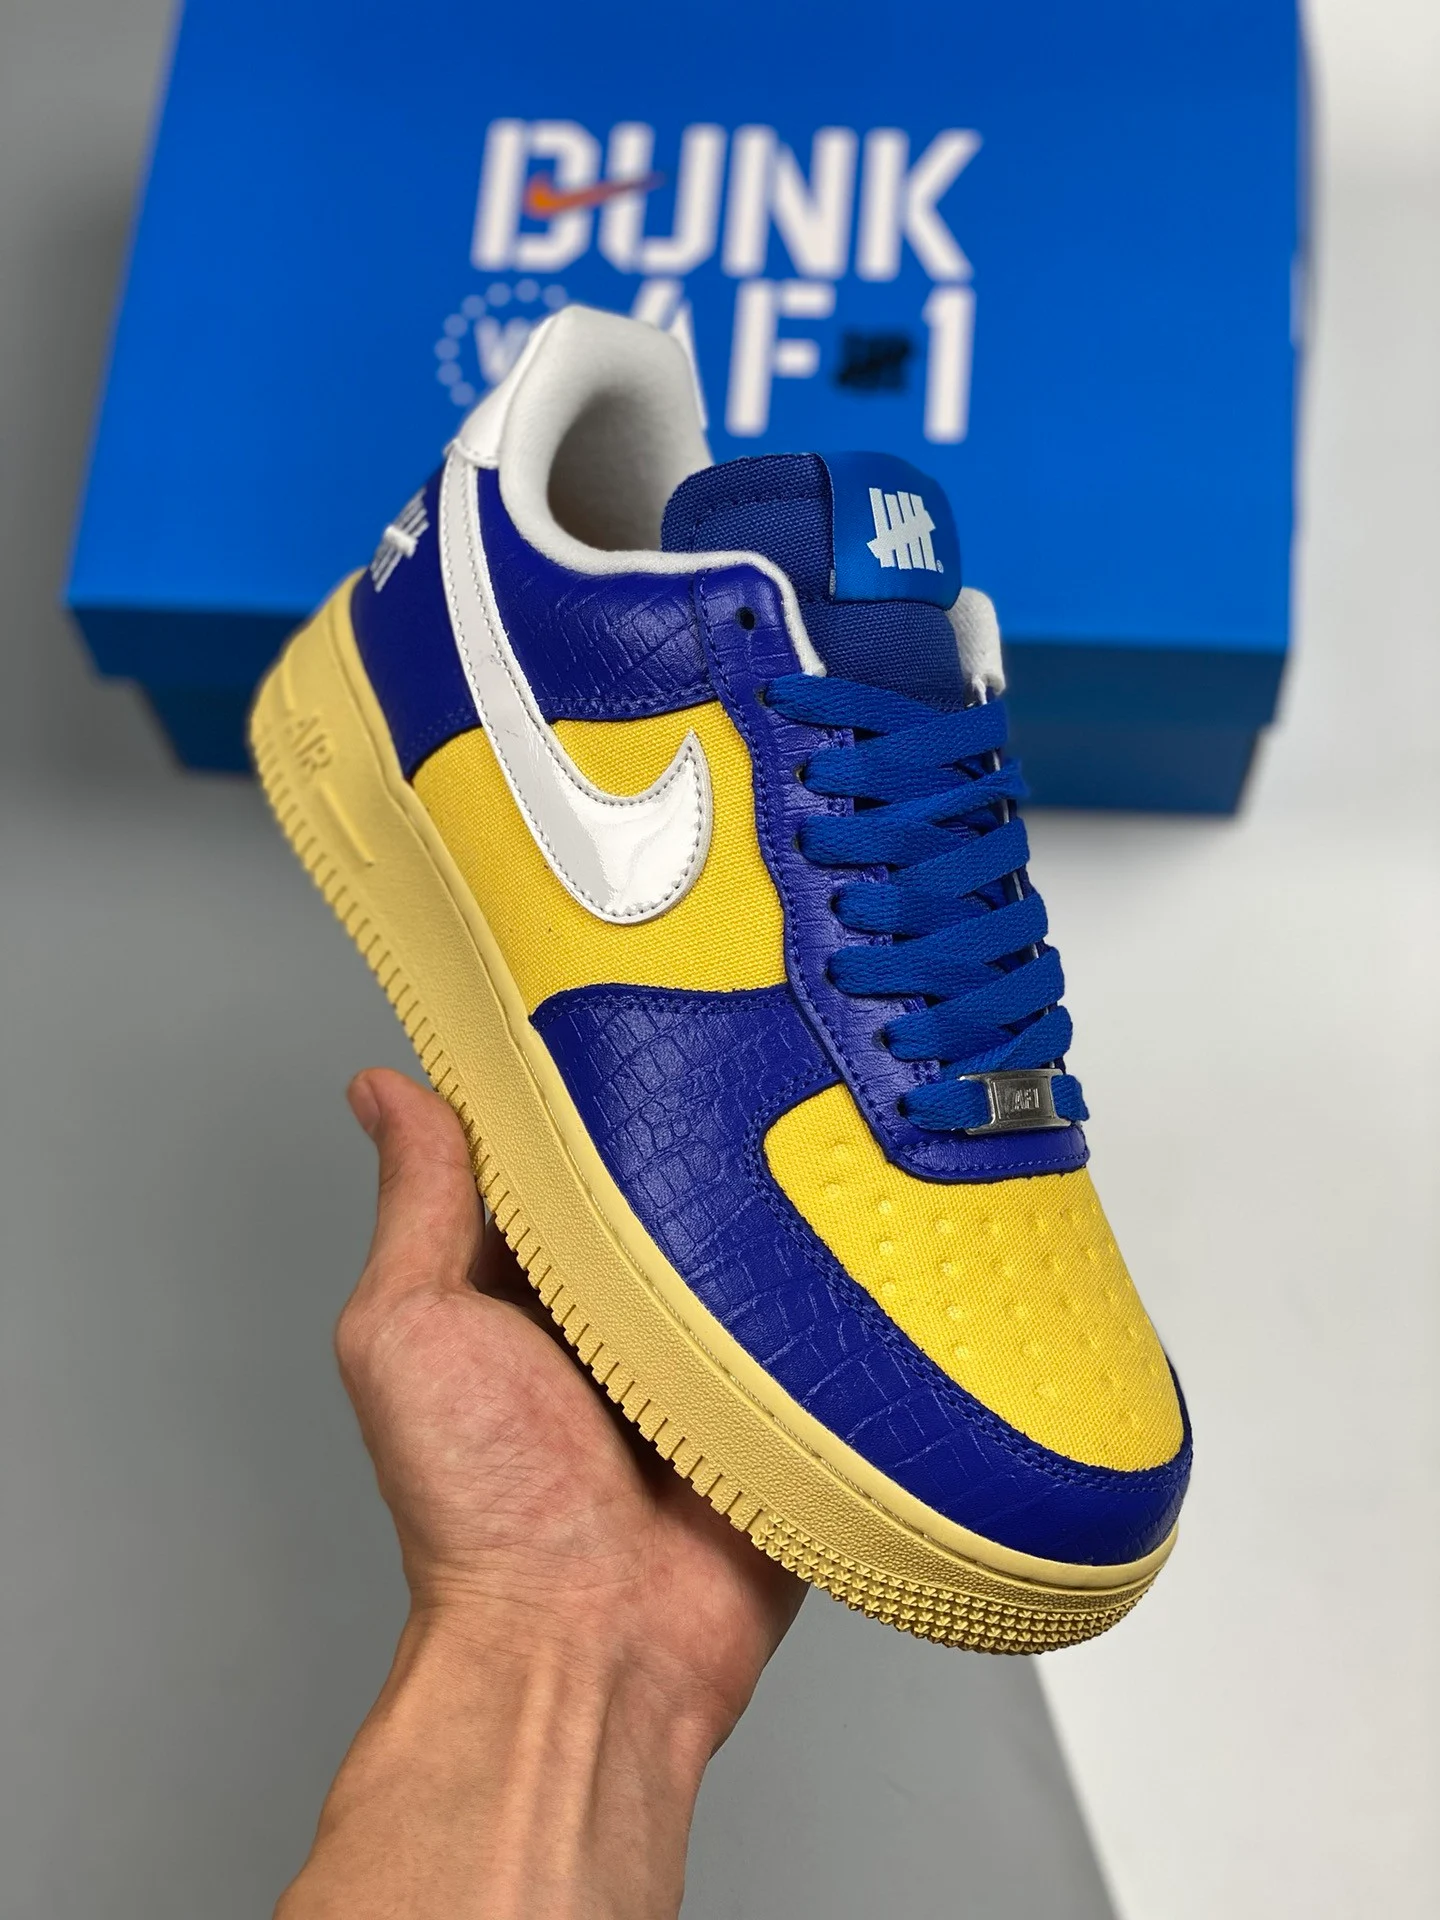 Undefeated x Nike Air Force 1 5 On It Blue Yellow For Sale